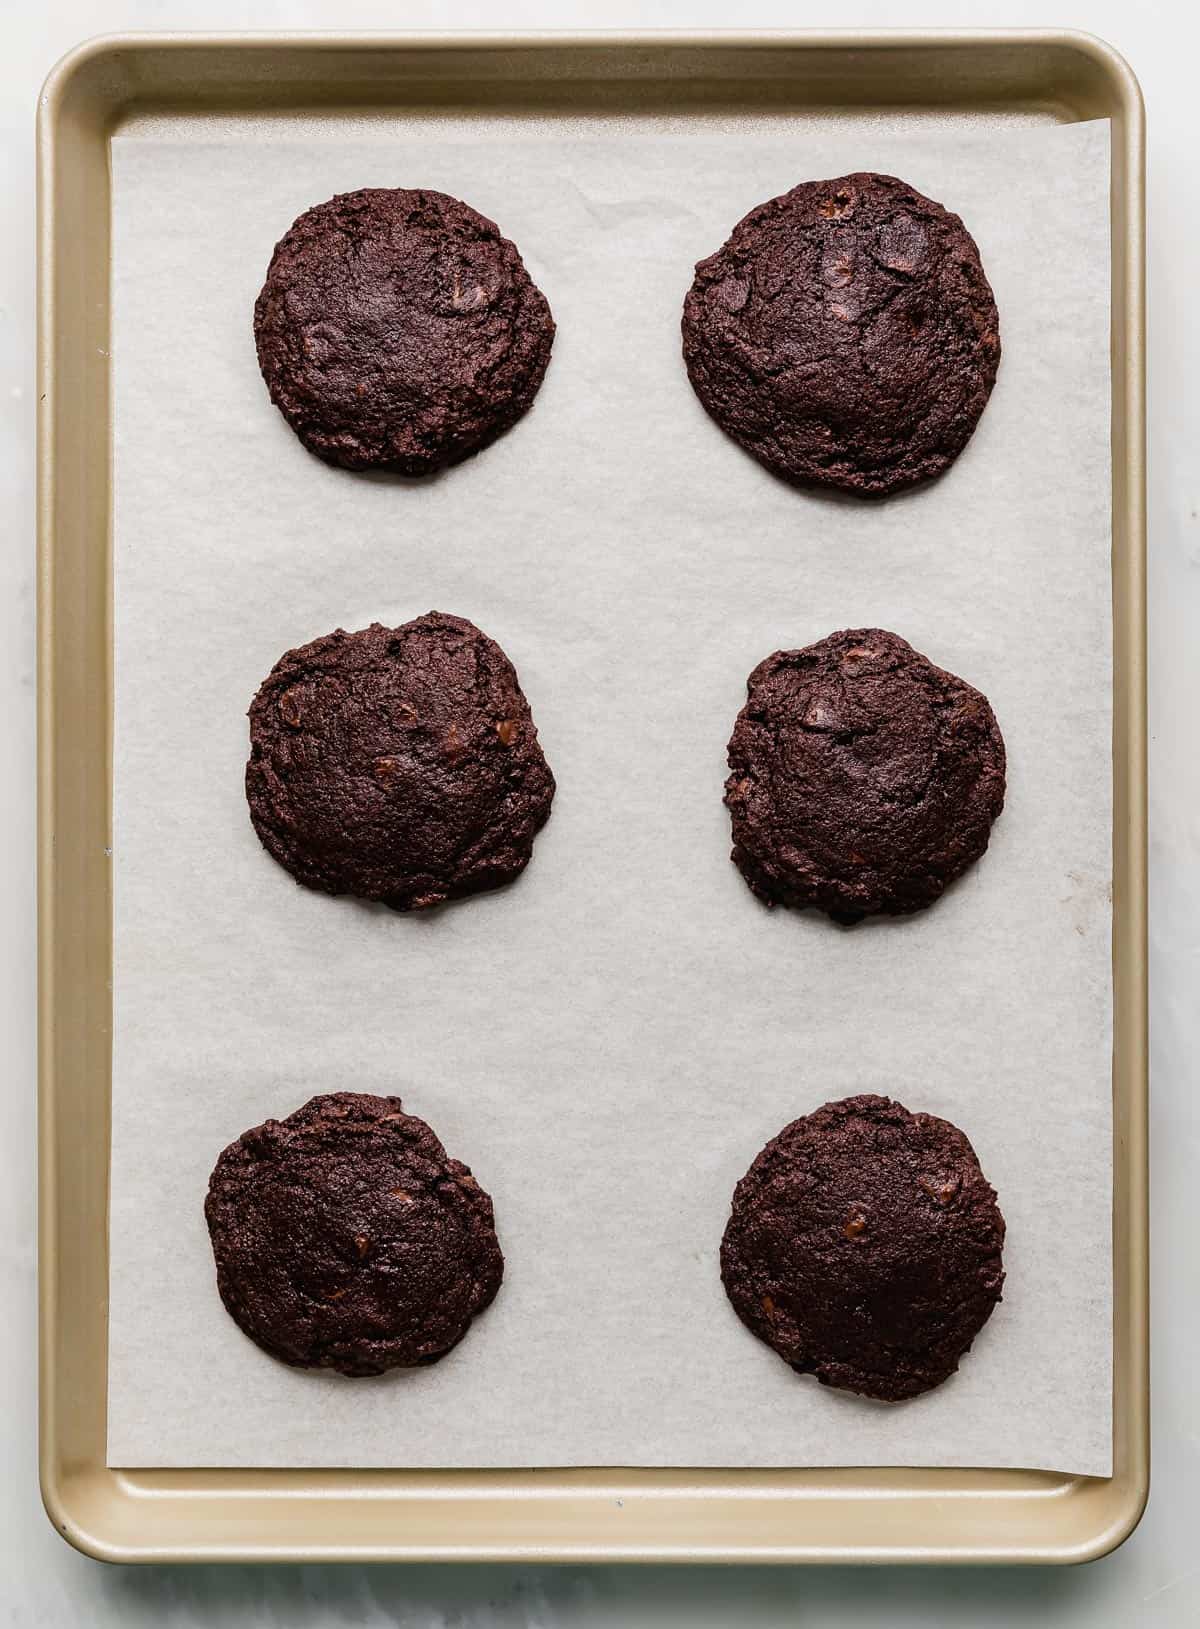 Six baked chocolate cookies on a white parchment lined baking sheet.